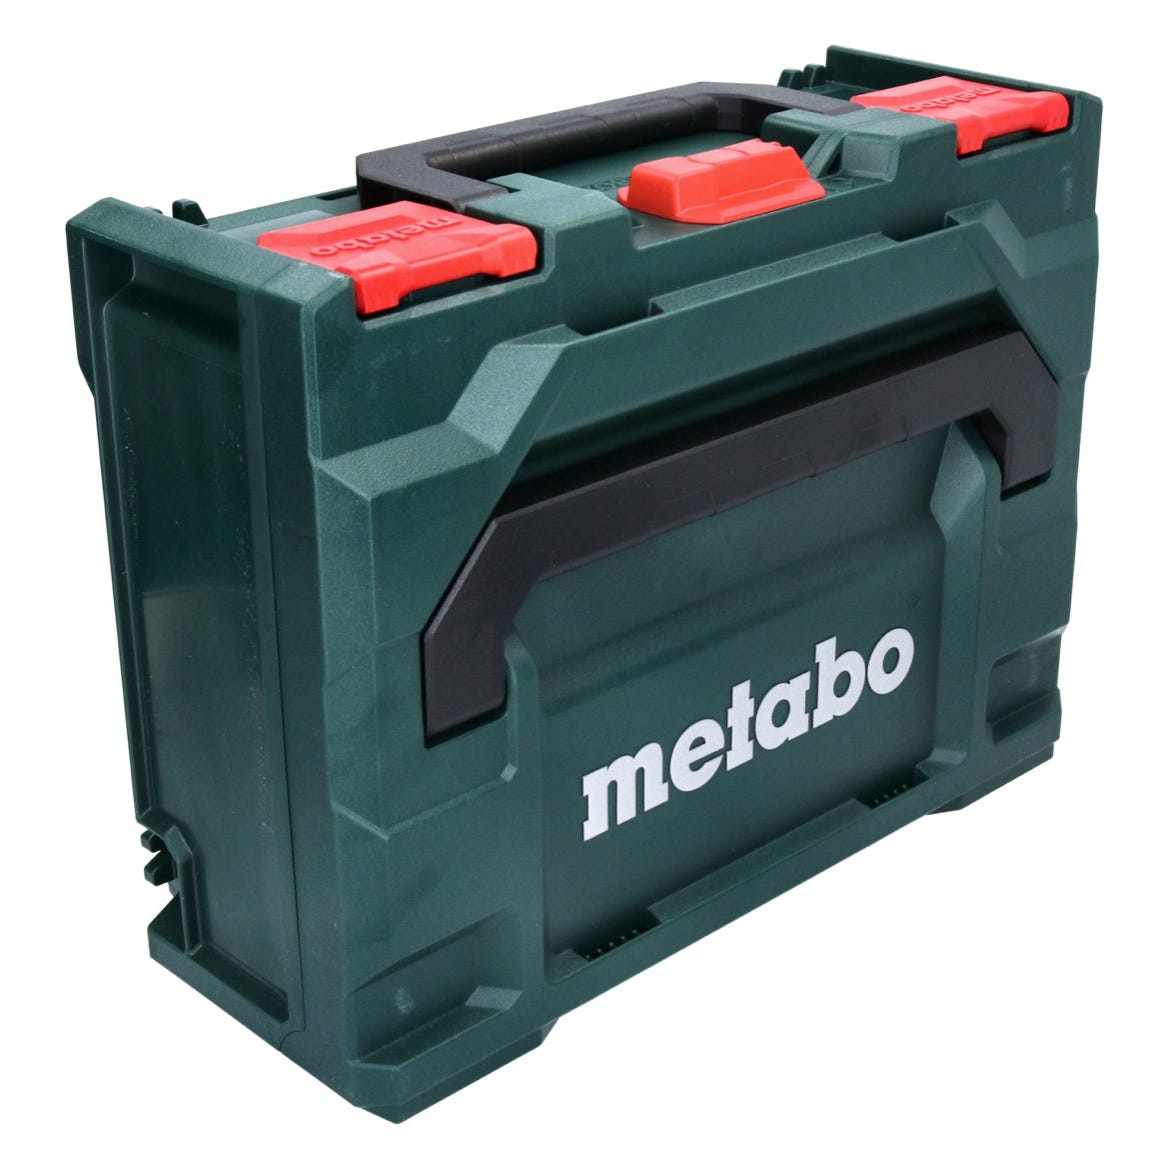 Metabo metaBOX 145 Set: 4x Coffrets 396x296x145mm, système empilable + 4x Inserts universels 3